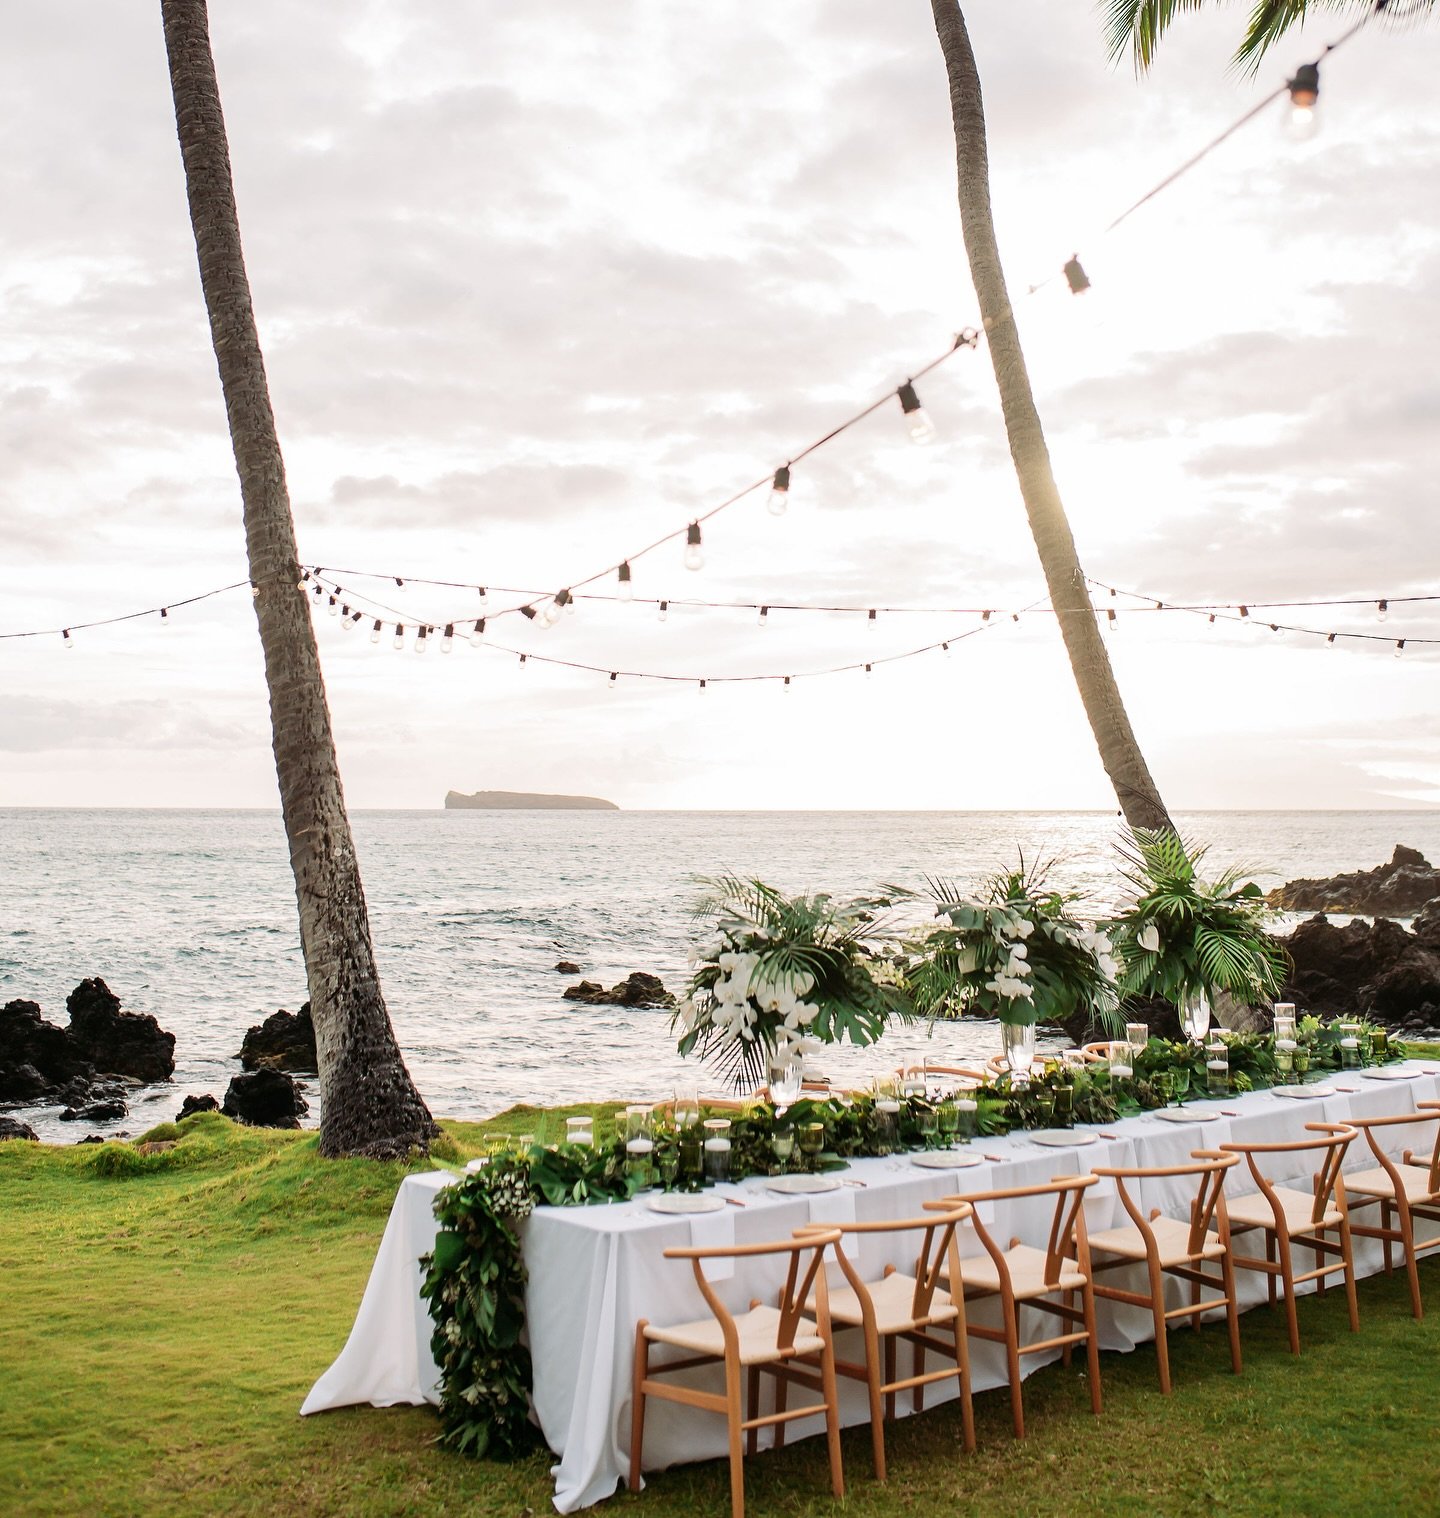 Take us back to this special wedding at the White Orchid Beach House featuring a lush tropical reception, an oceanfront view, and the warmth of golden hour lighting, the cherry on top to this perfect day! 

Event Design &amp; Coordination @whiteorchi